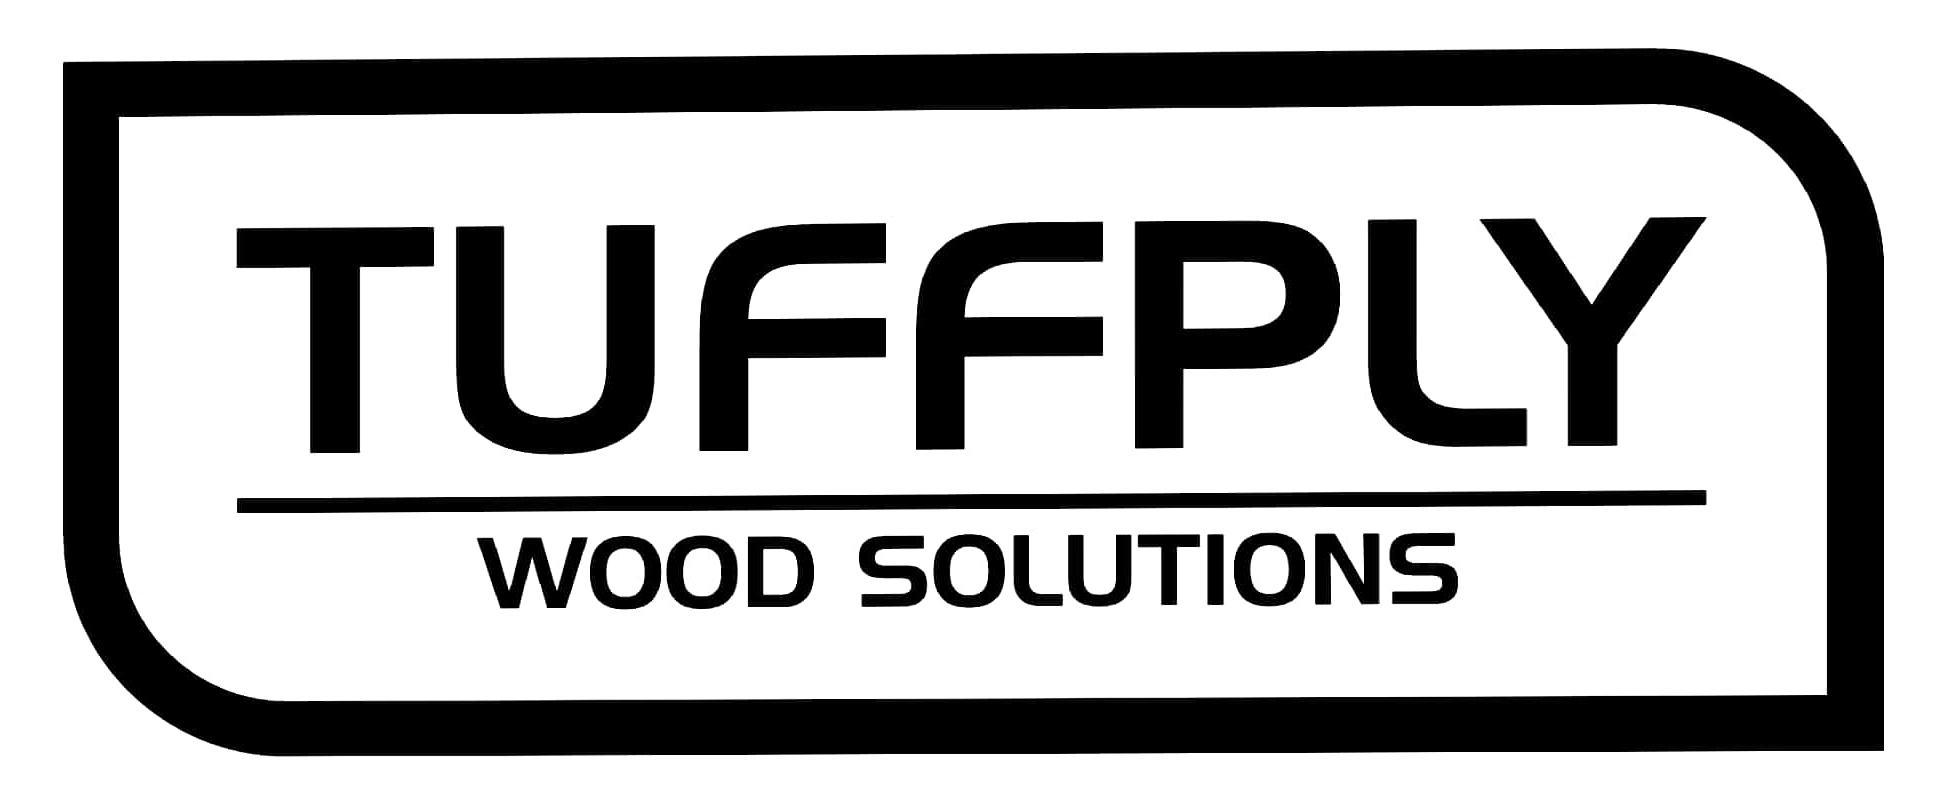 TUFFPLY WOOD SOLUTIONS